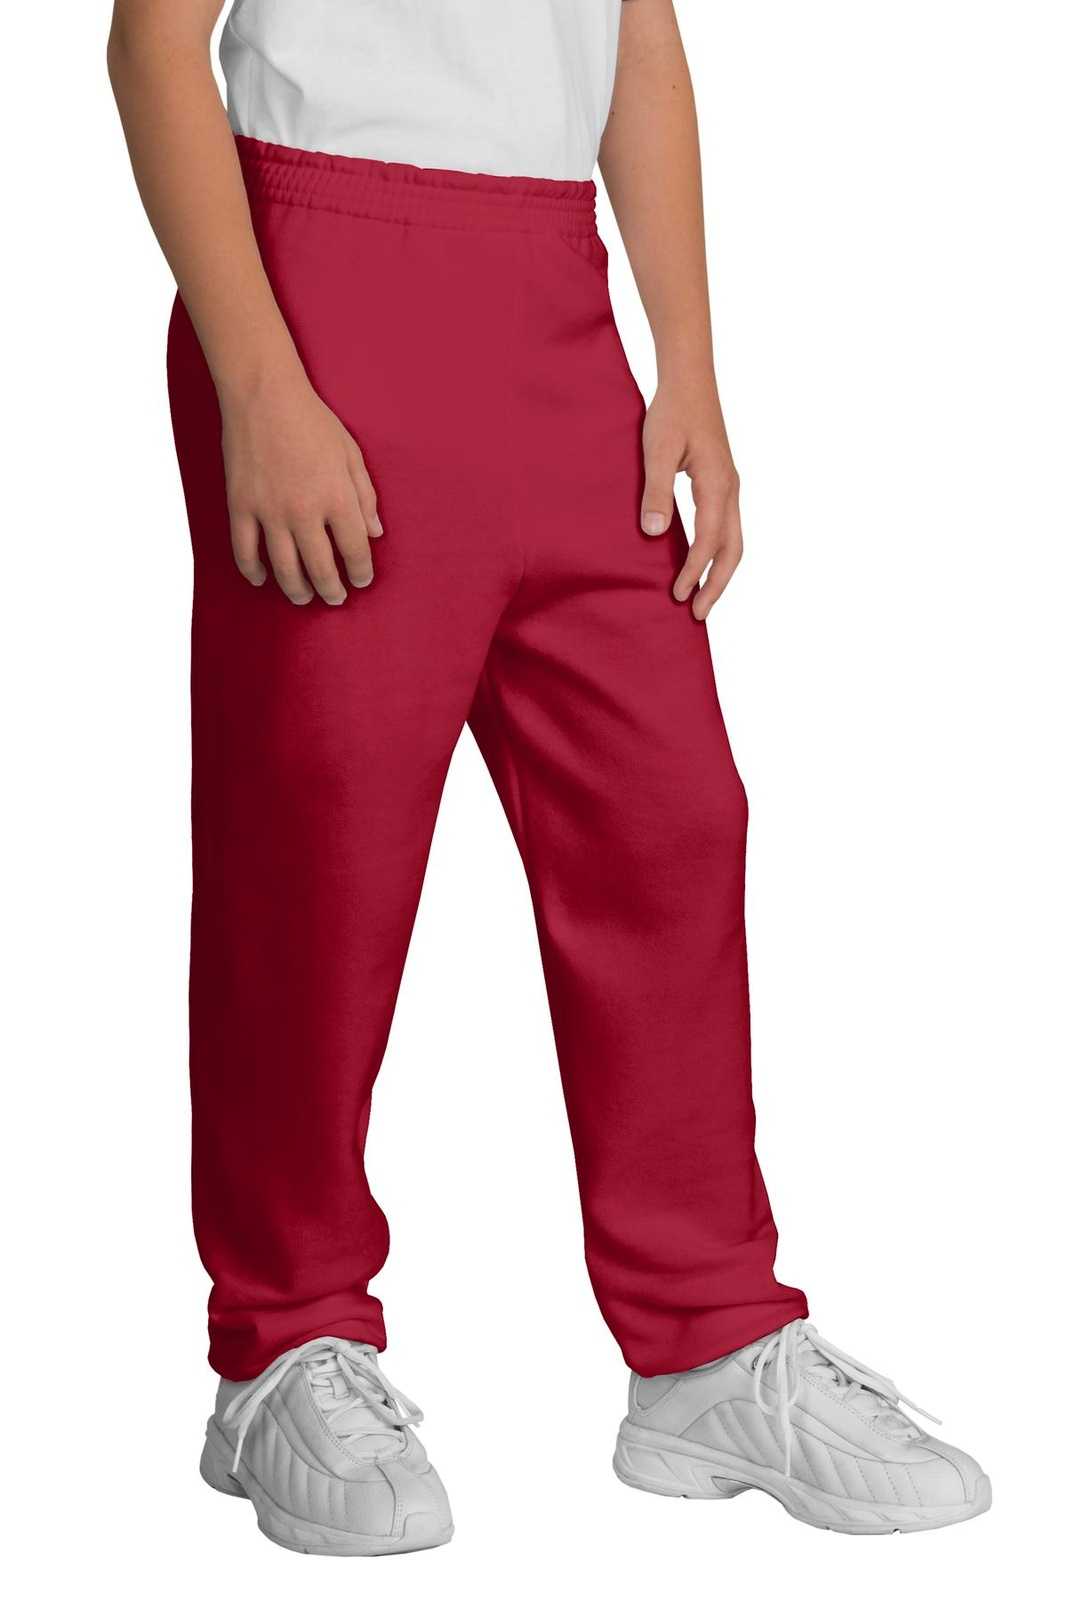 Port & Company PC90YP Youth Core Fleece Sweatpant - Red - HIT a Double - 1